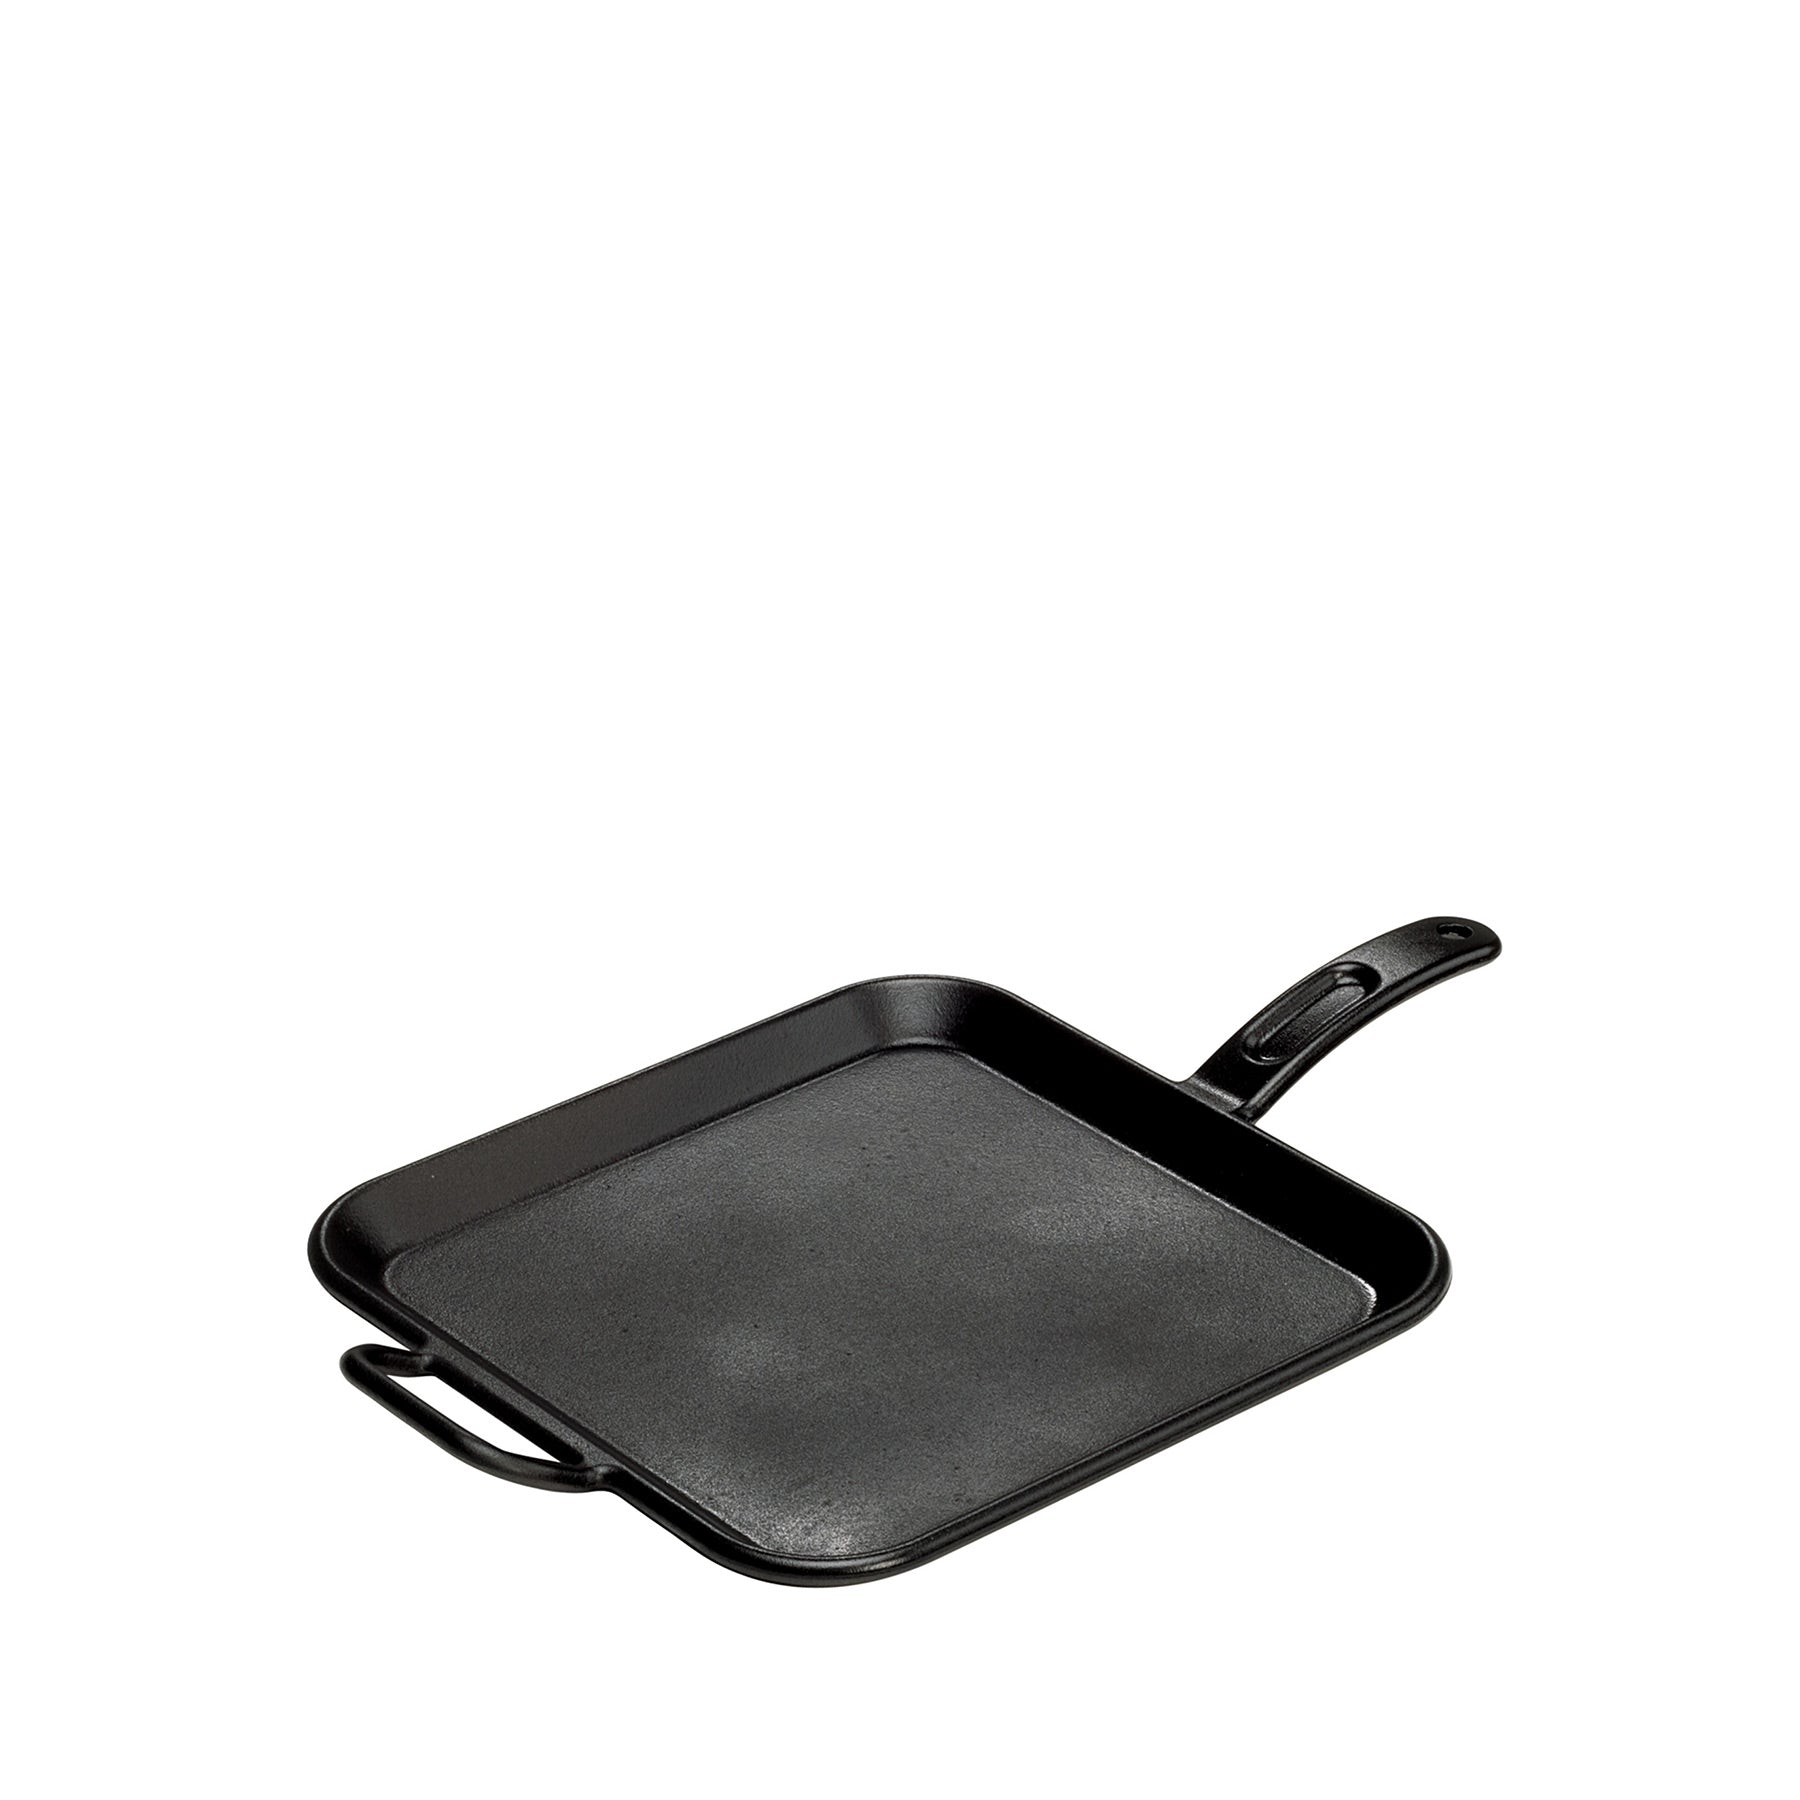 Vituzote.com - Lodge Cast Iron Square Grill Pan, 12-inch, Ribbed